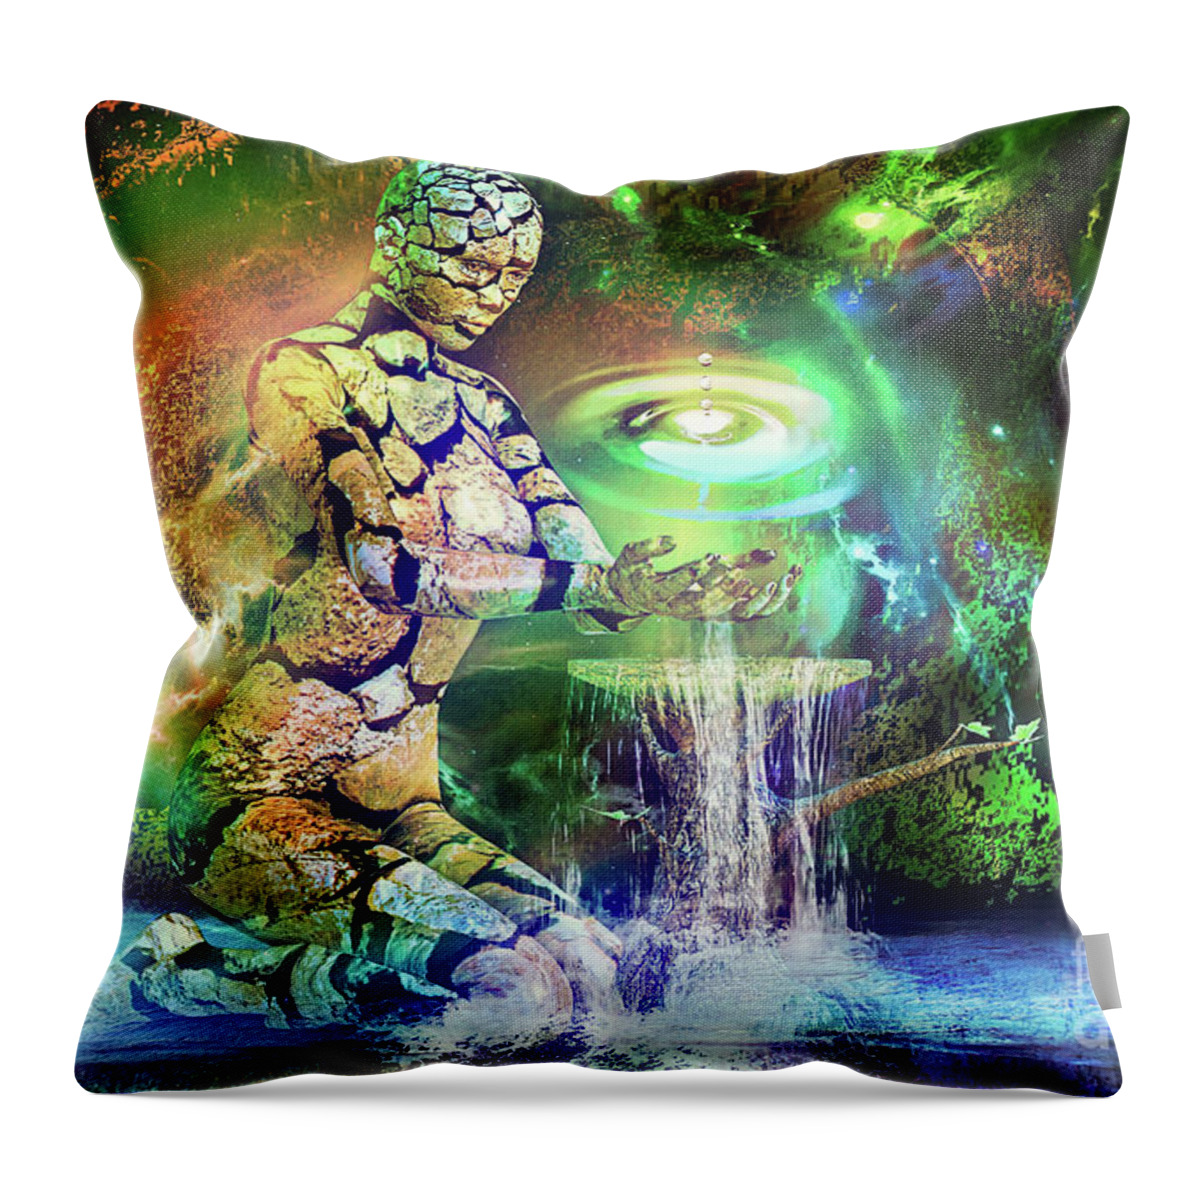 Life Throw Pillow featuring the digital art Earth Life X by Shadowlea Is